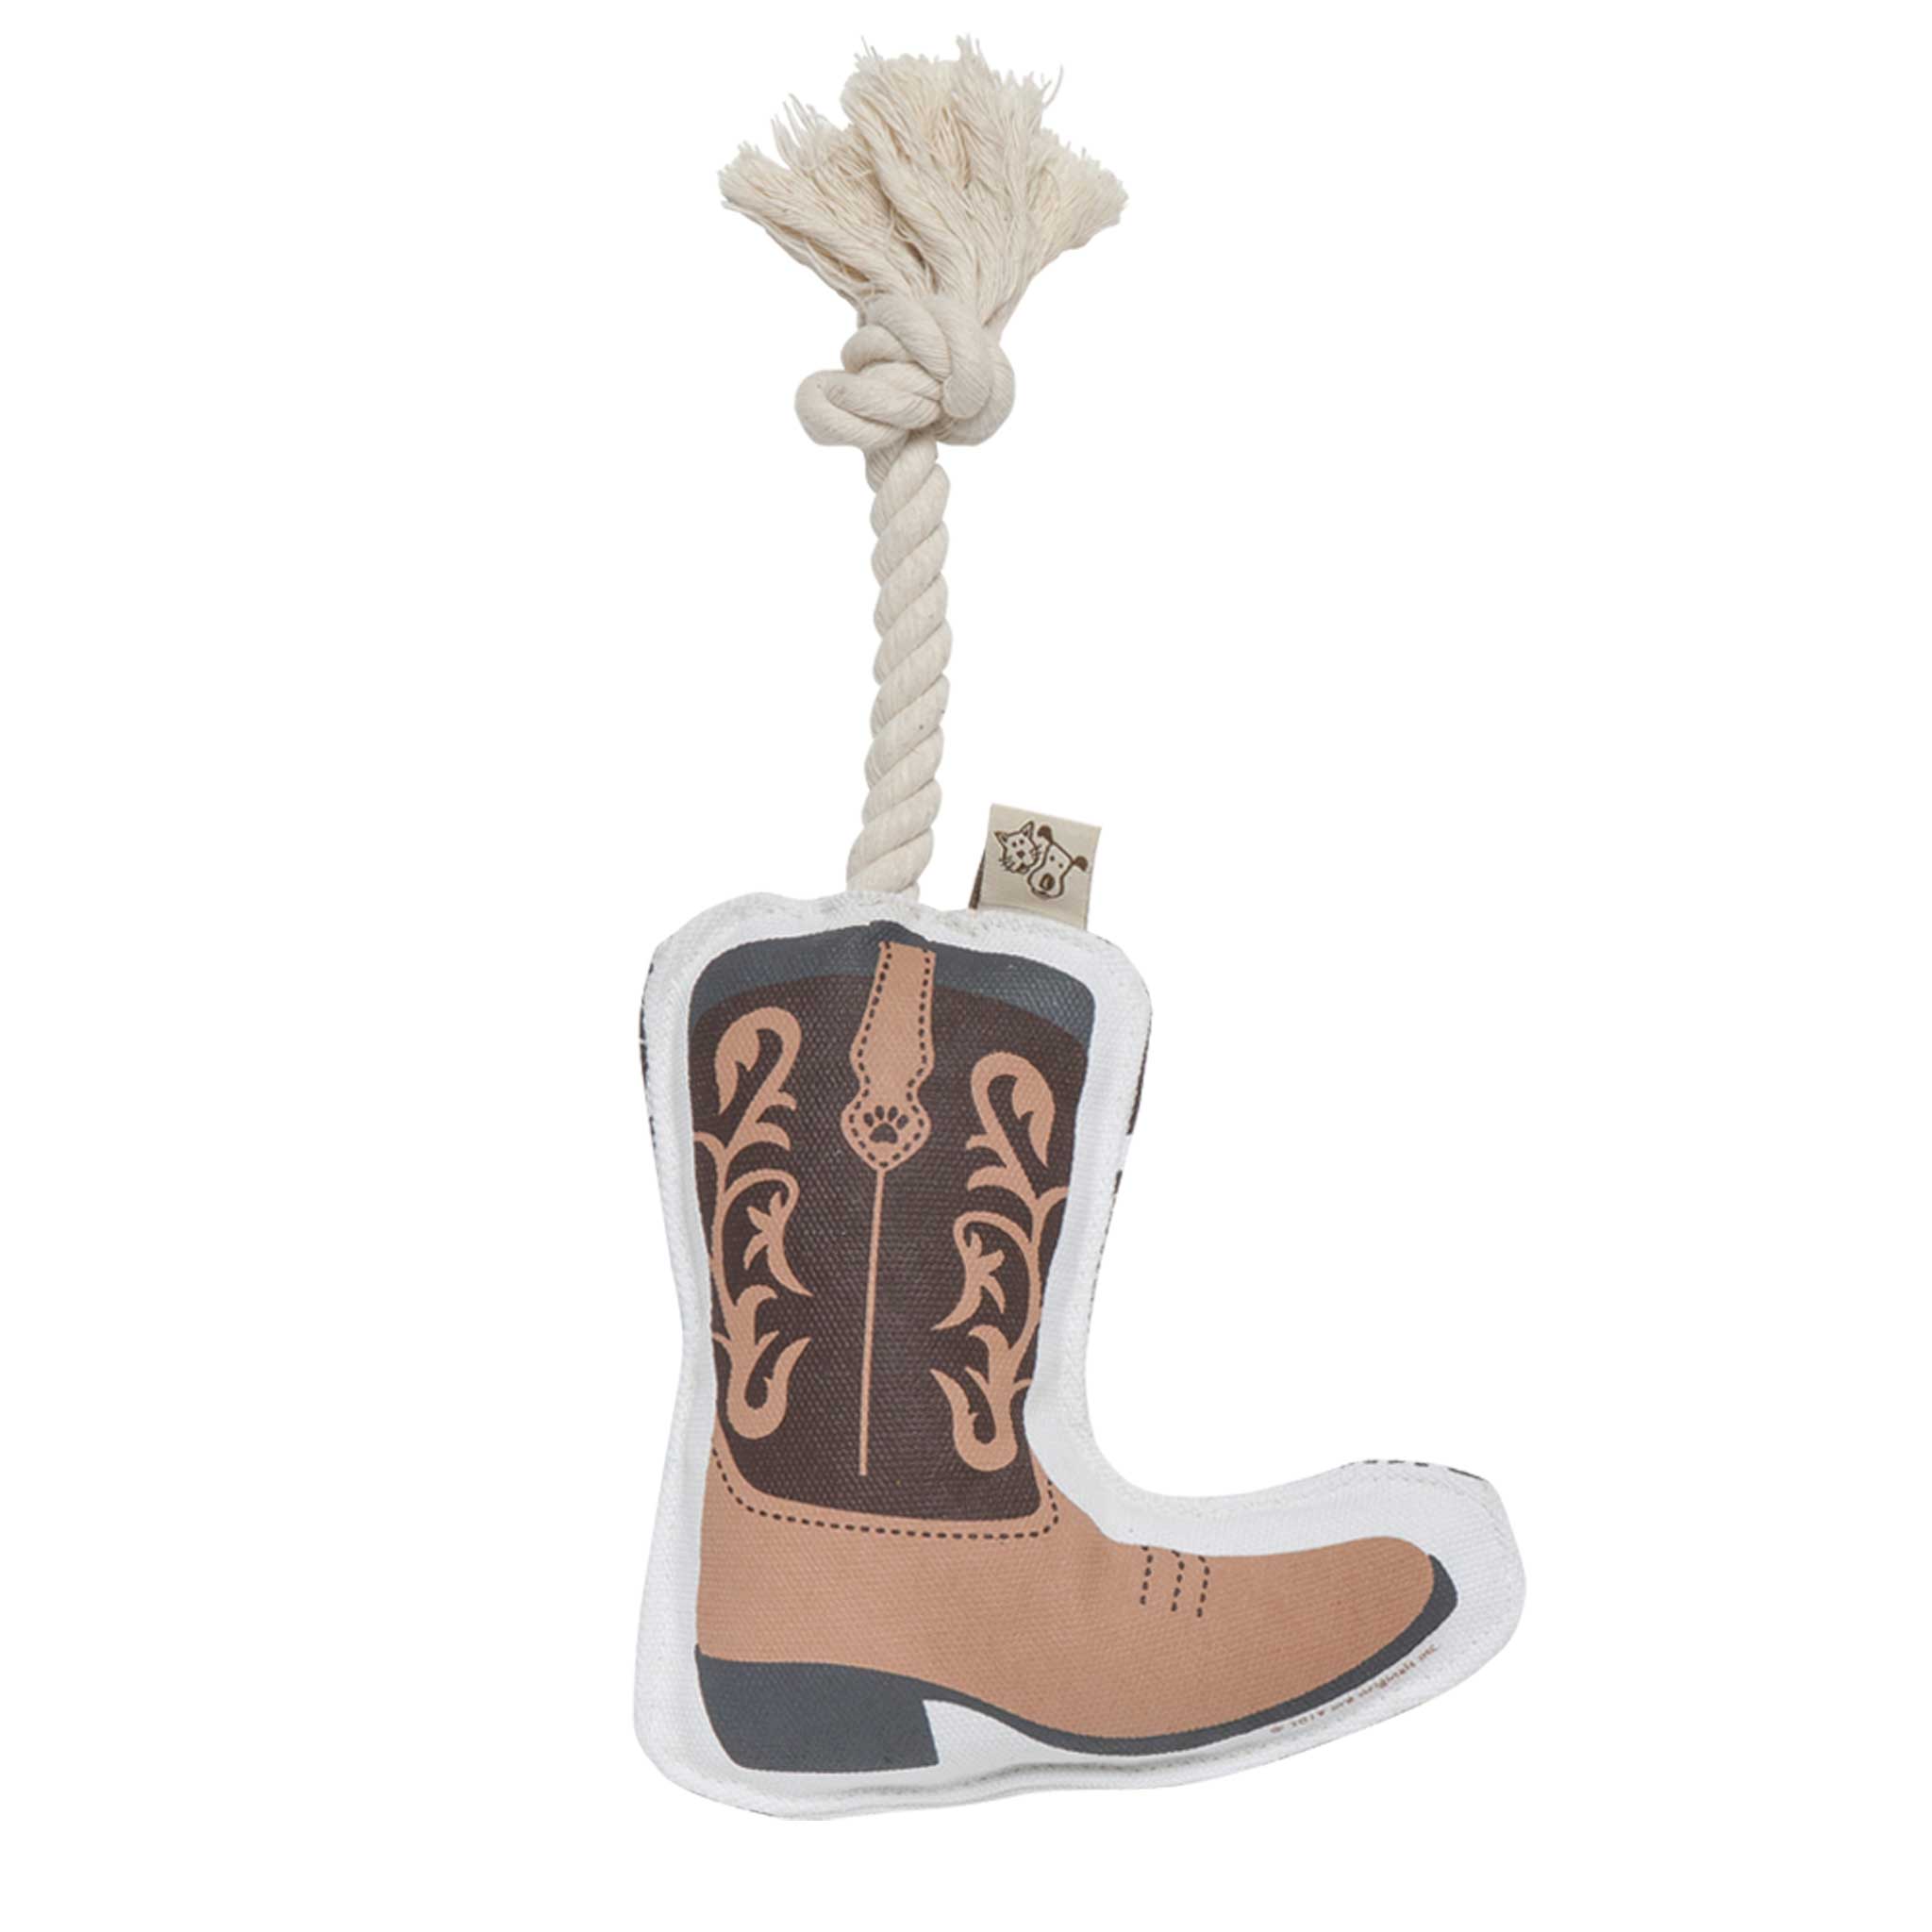 Rope Dog Toy | Cowboy Boot